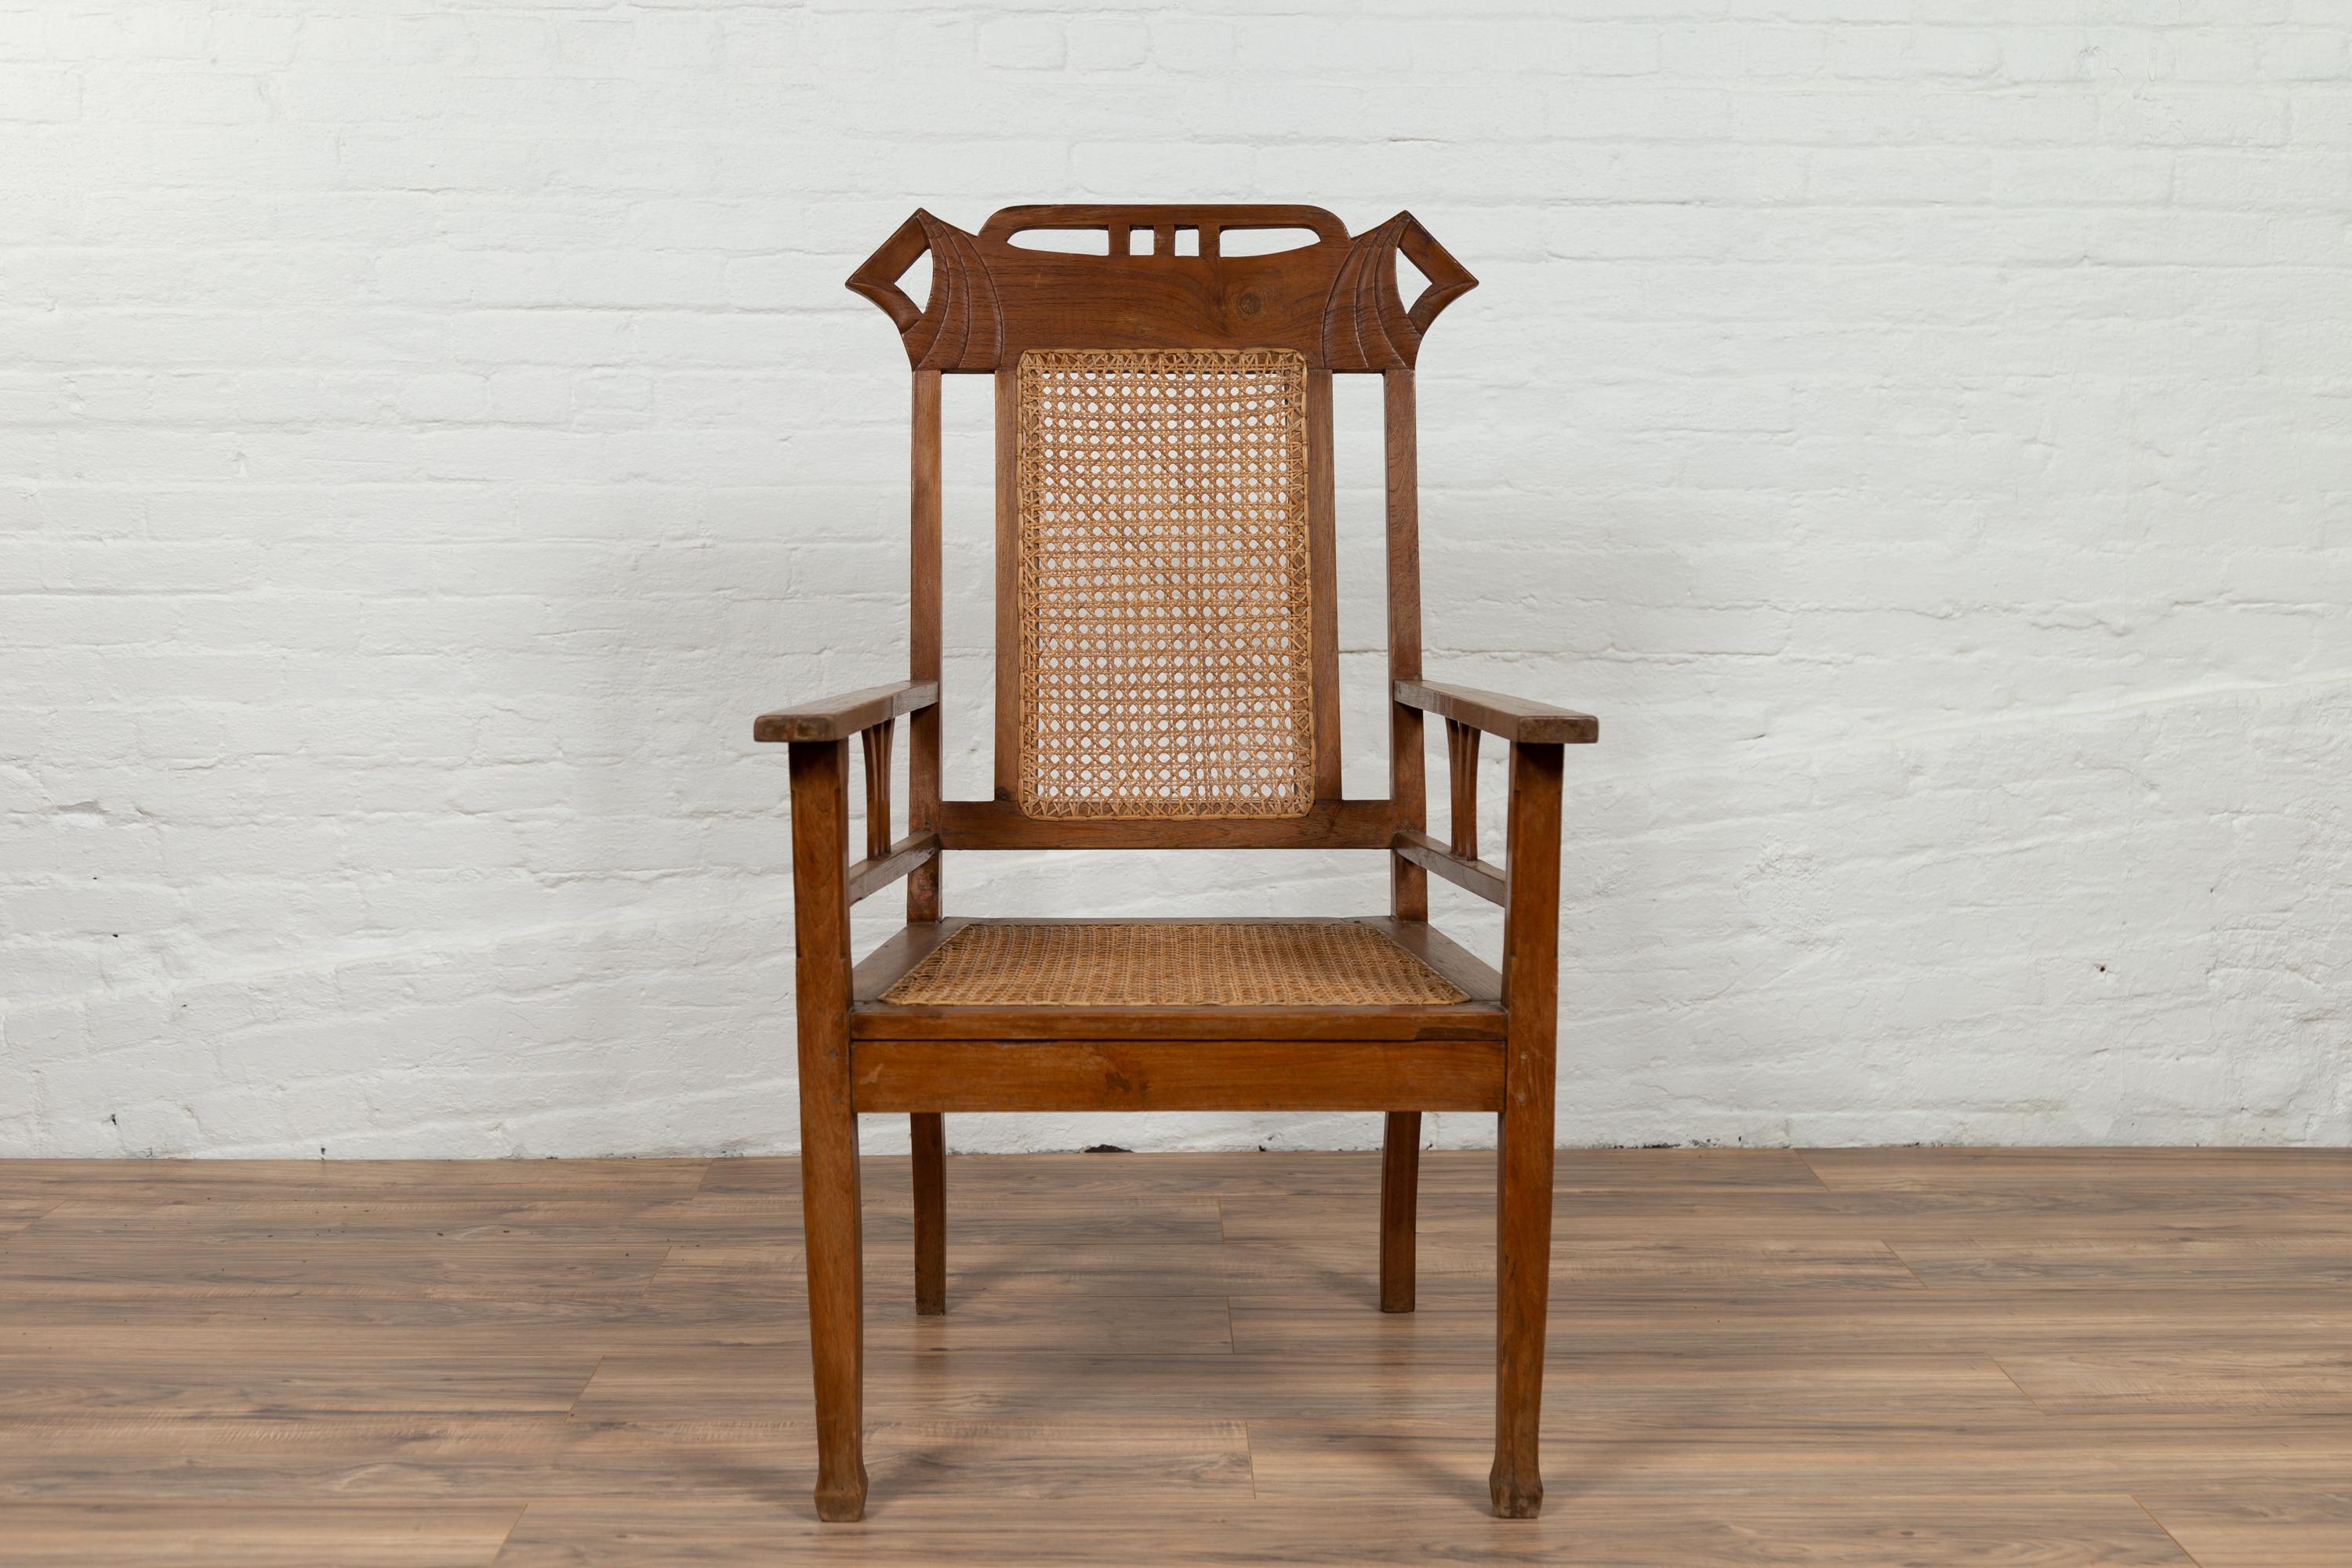 A vintage Indonesian teak wood Dutch Colonial armchair from the mid-20th century, with rattan seat and back. We currently have two available, priced and sold individually. Born in Indonesia during the mid-century period, this Dutch Colonial armchair